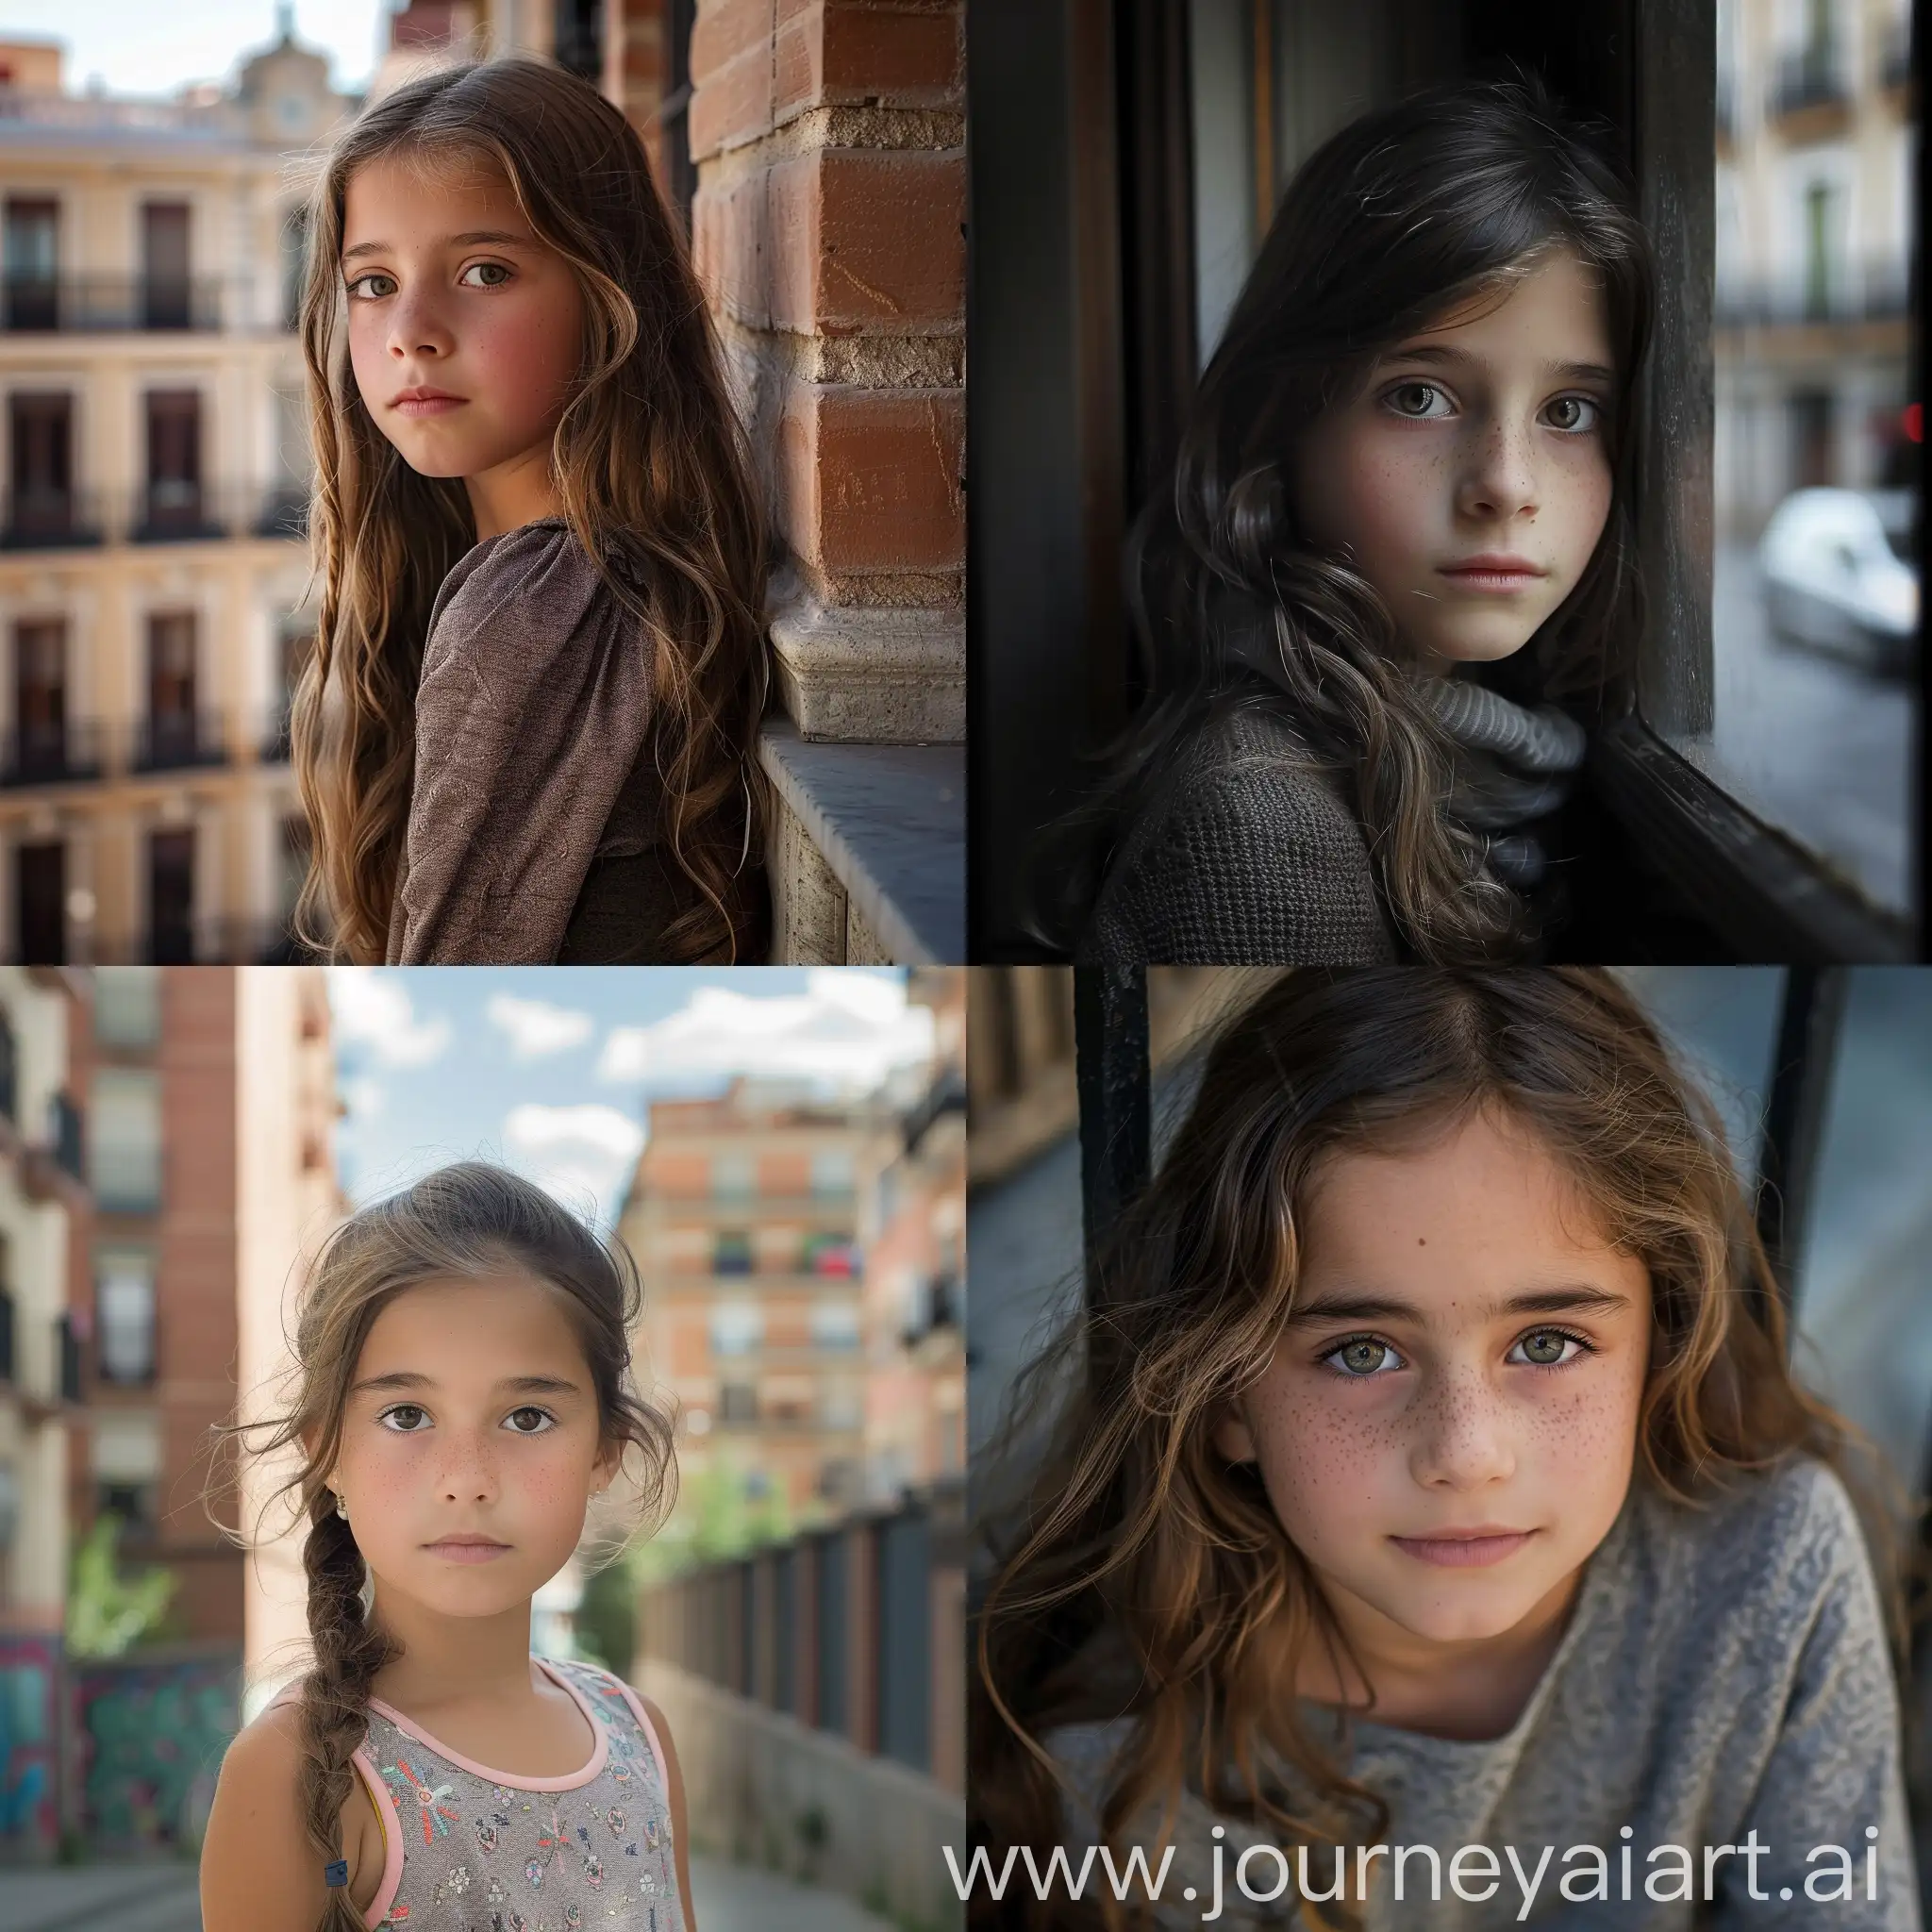 A 10 year old Girl in Madrid, Spain